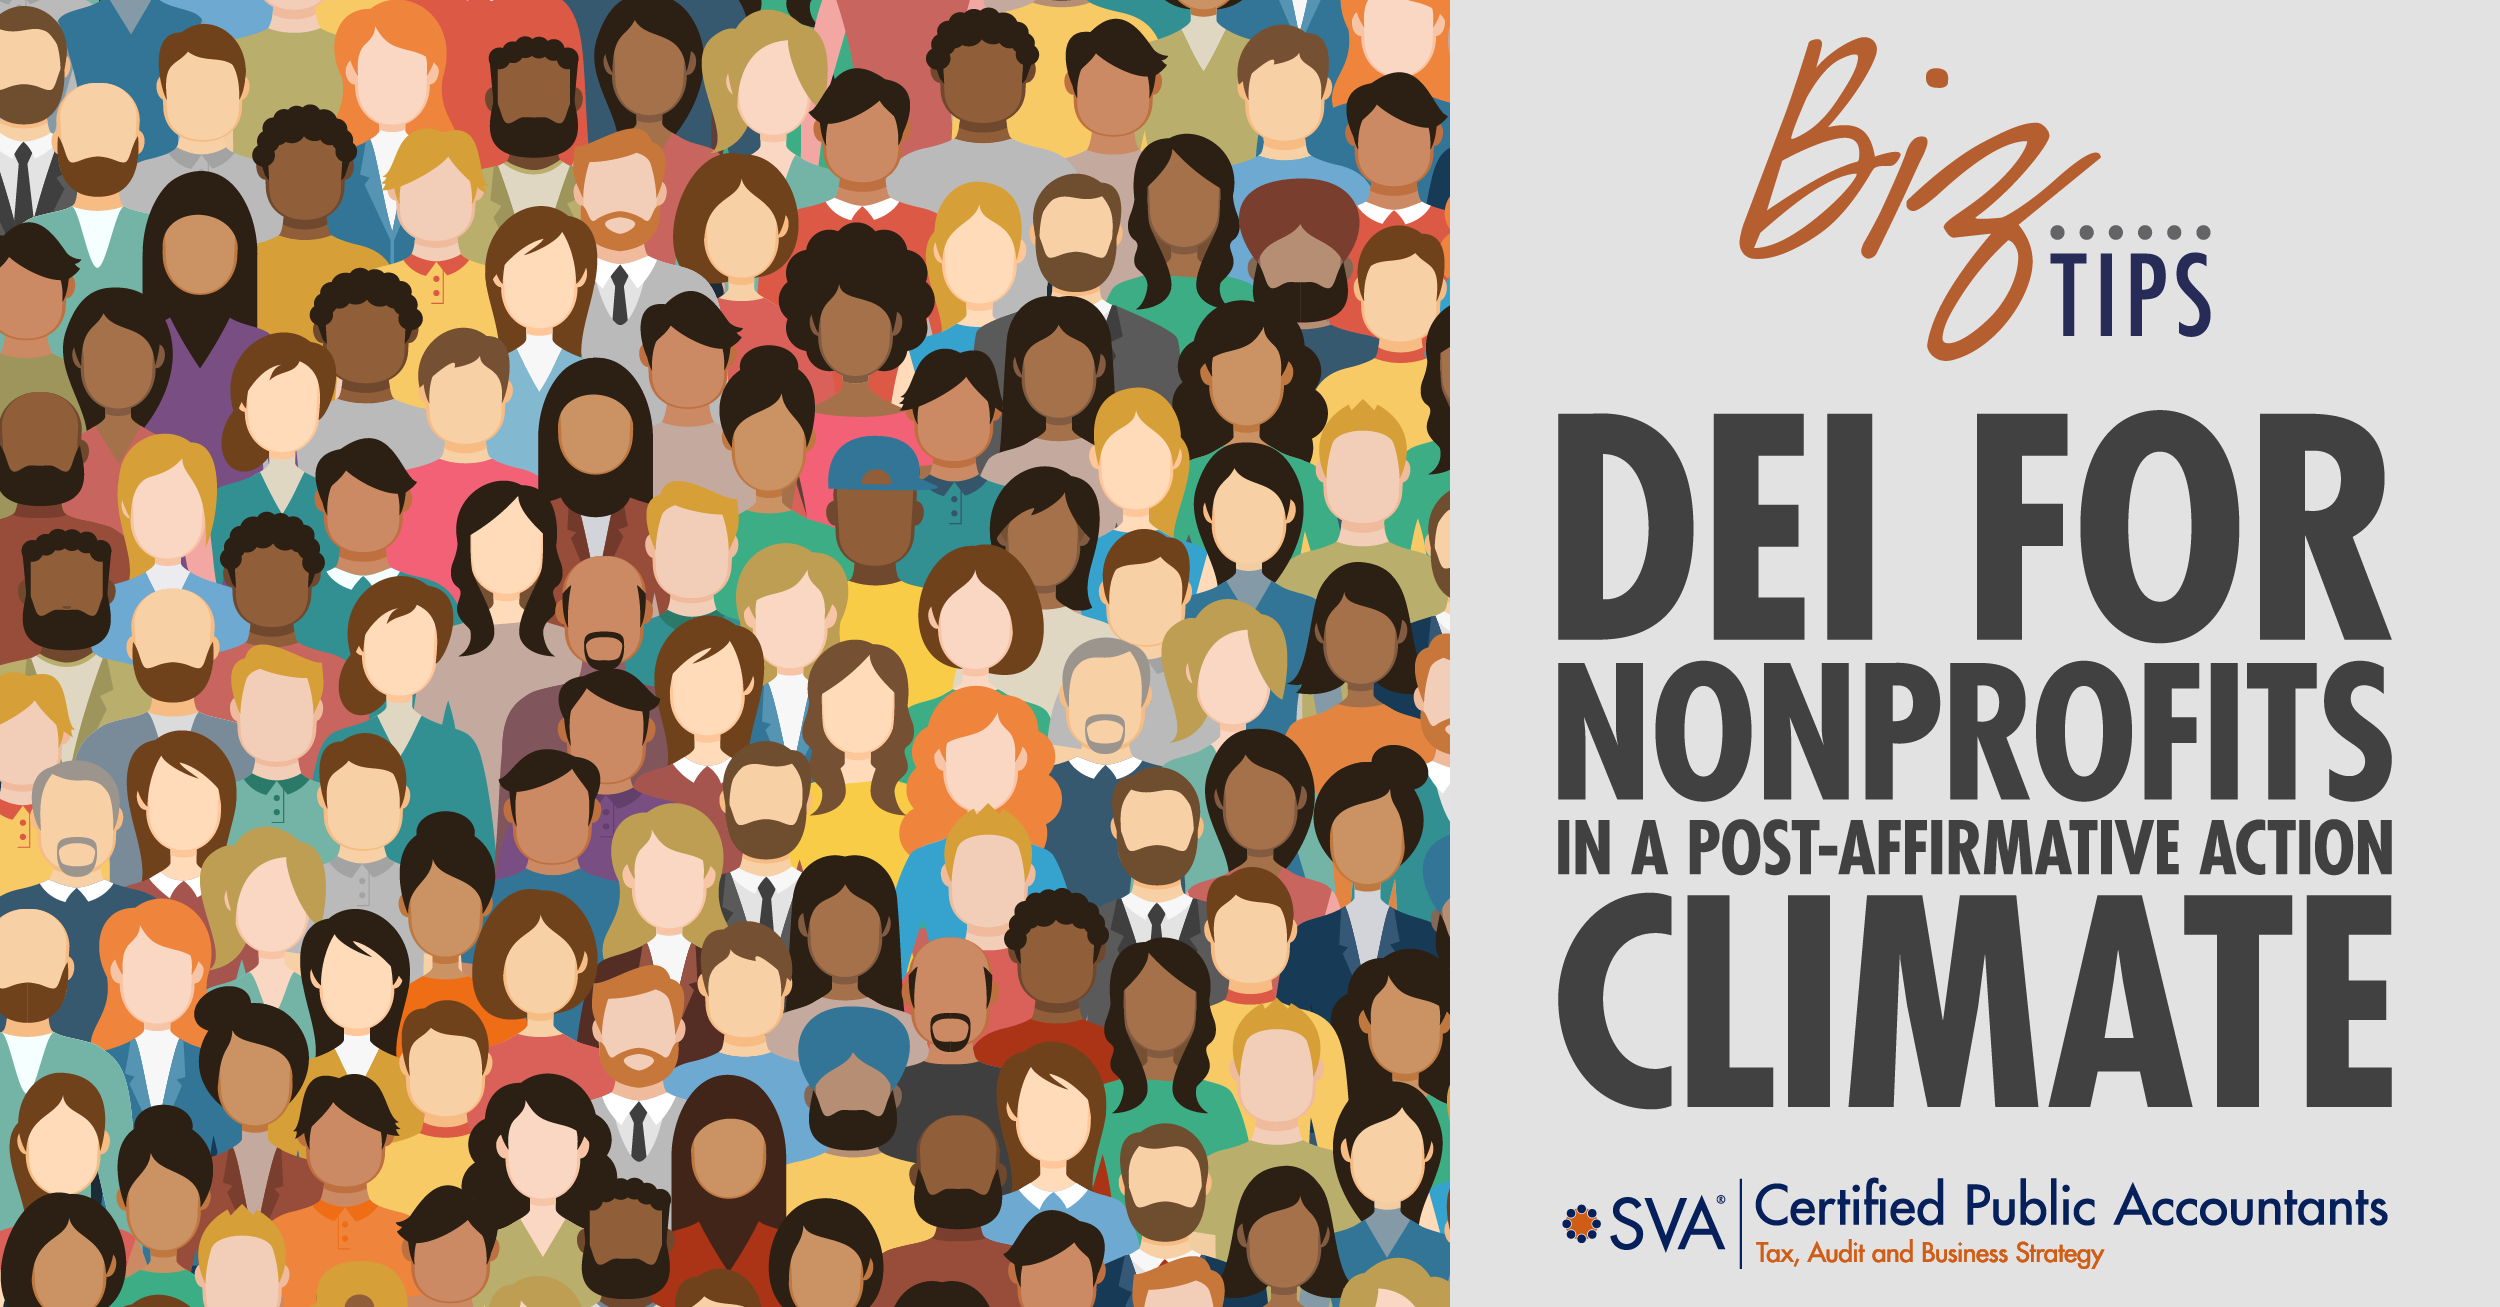 DEI for Nonprofits in a Post-Affirmative Action Climate